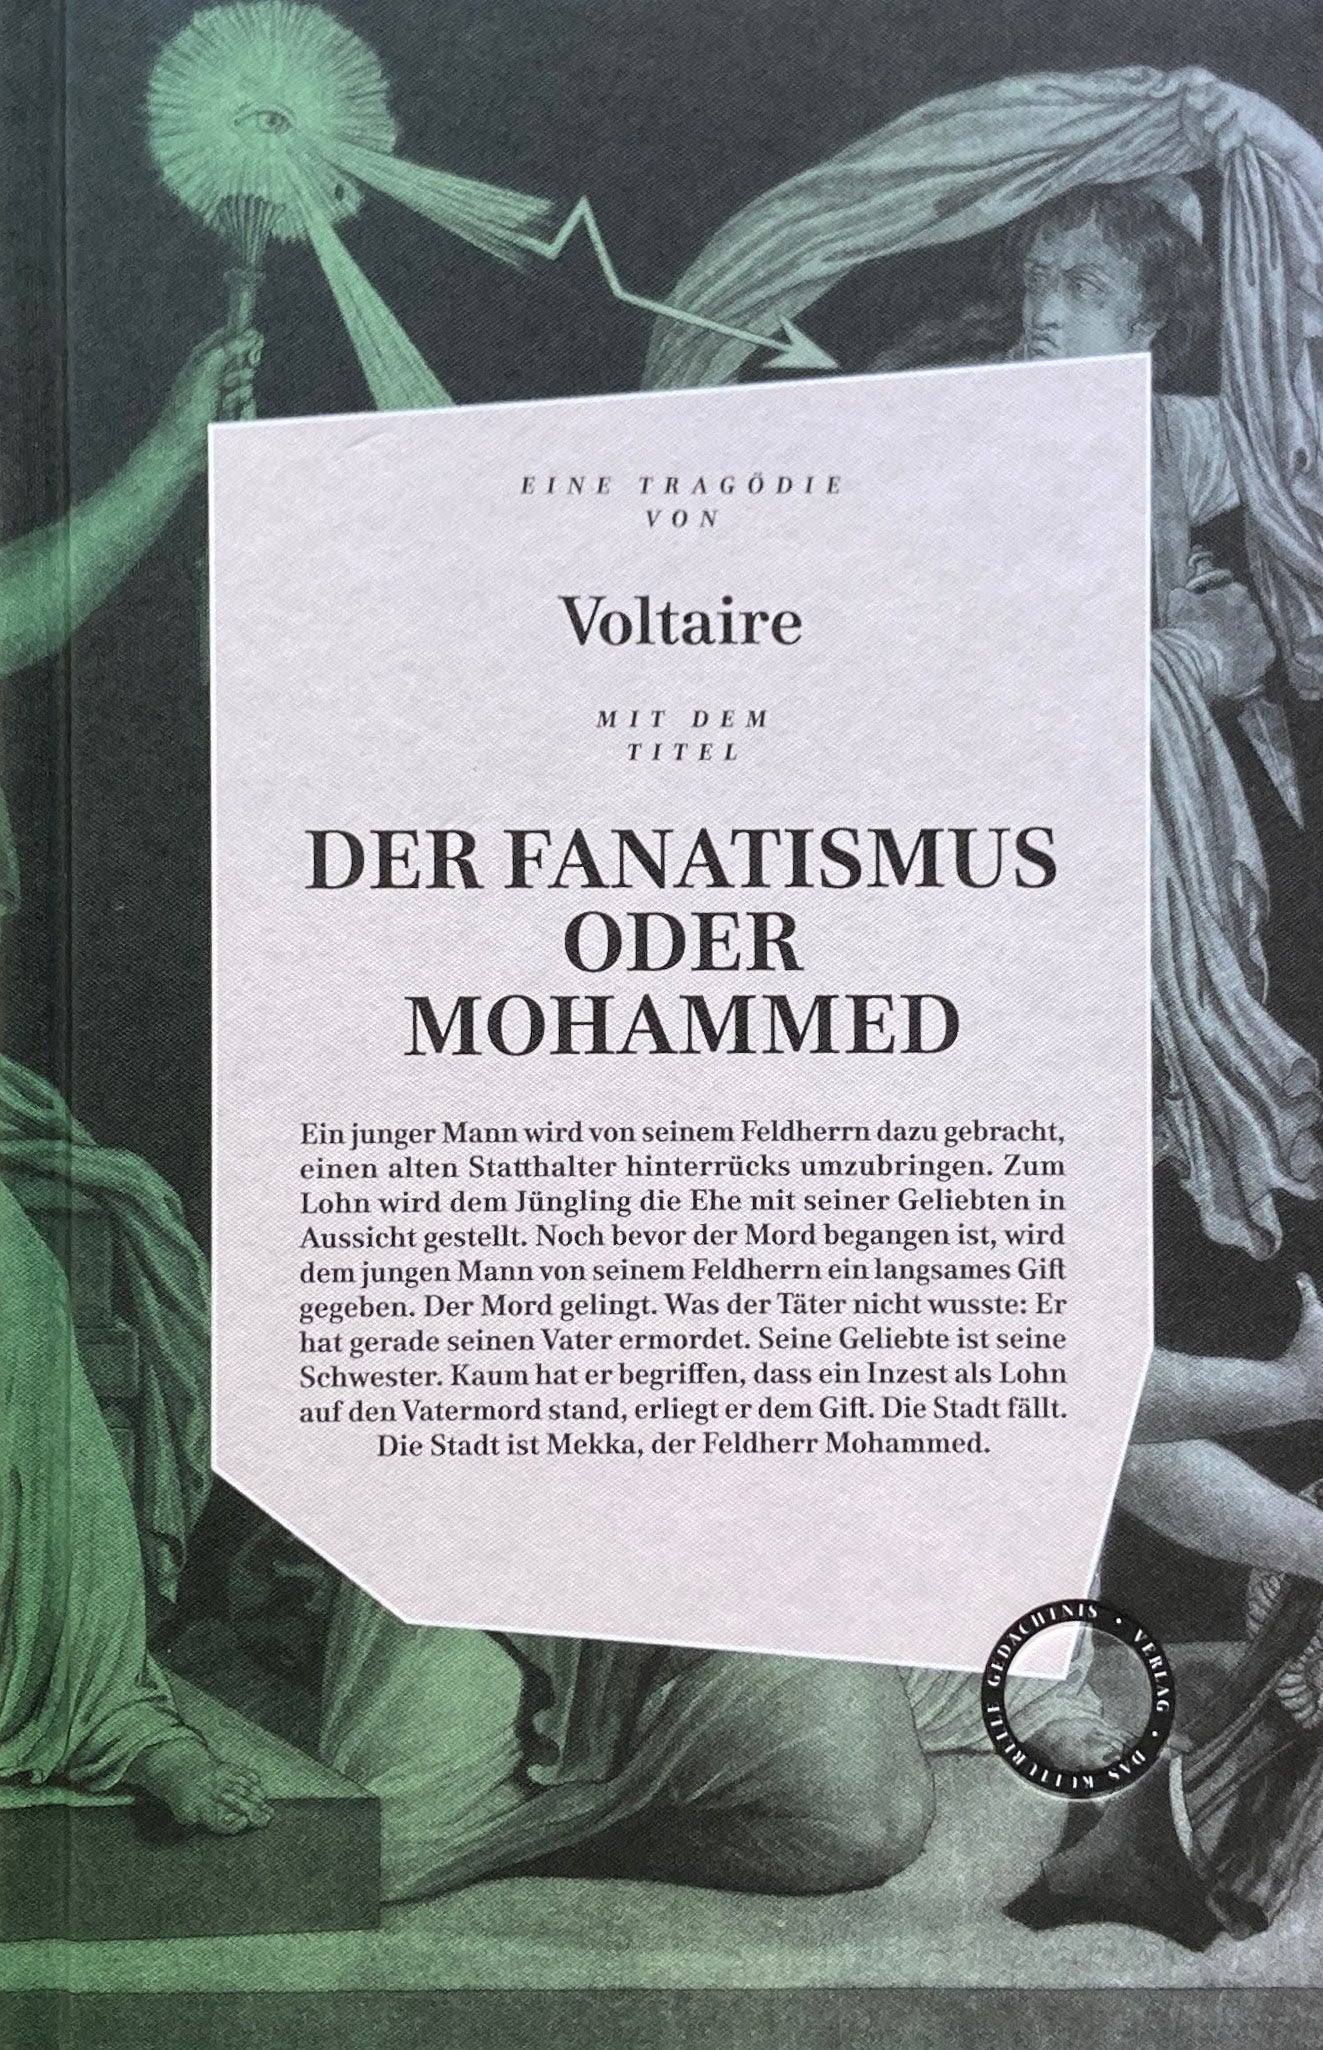 DER FANATISMUS ODER MOHAMMED　Voltaire　ヴォルテール